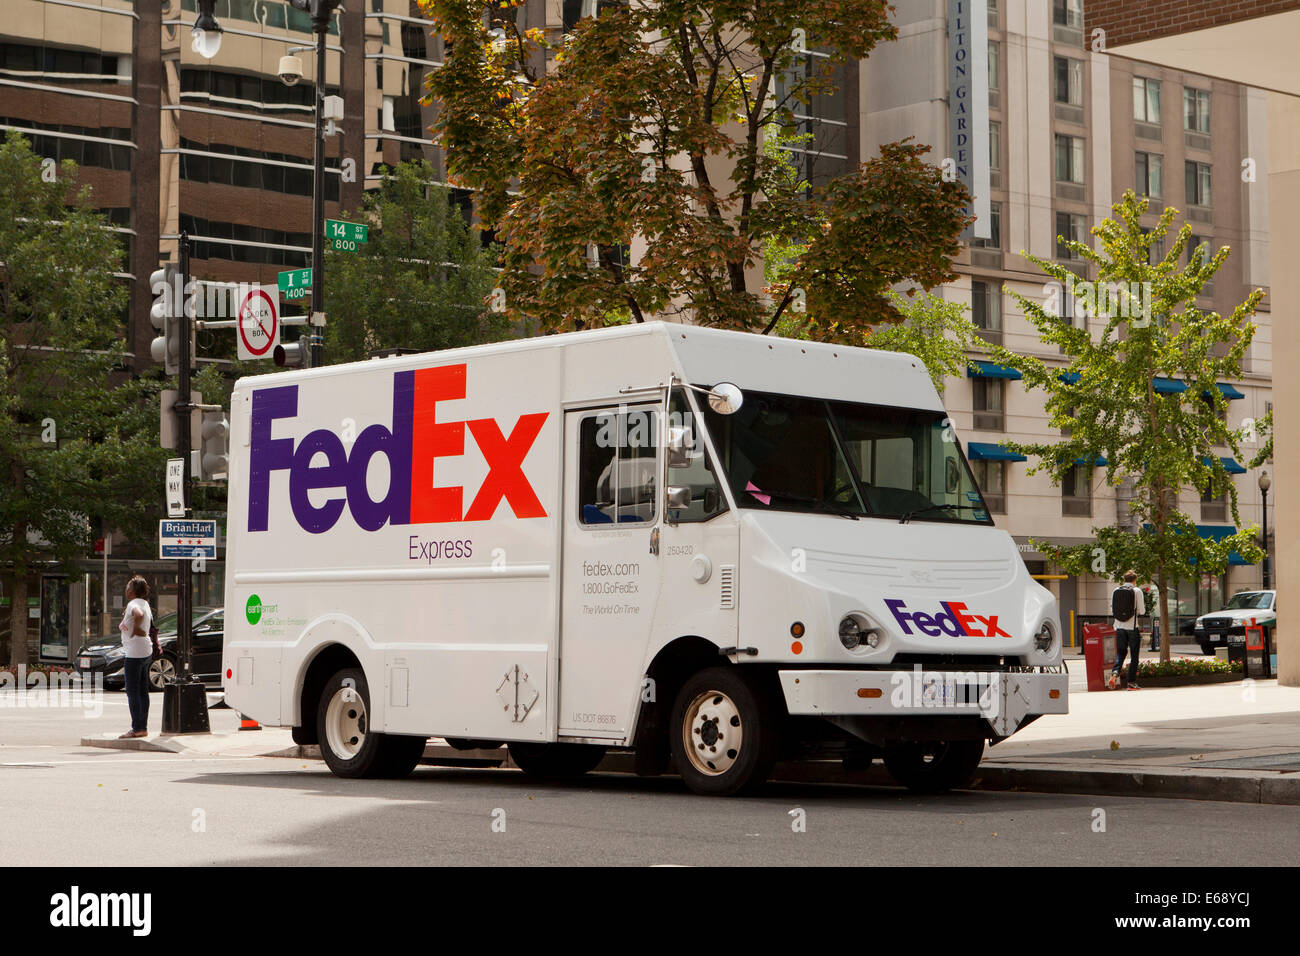 FedEx delivery truck parked on city street - Washington, DC USA Stock Photo